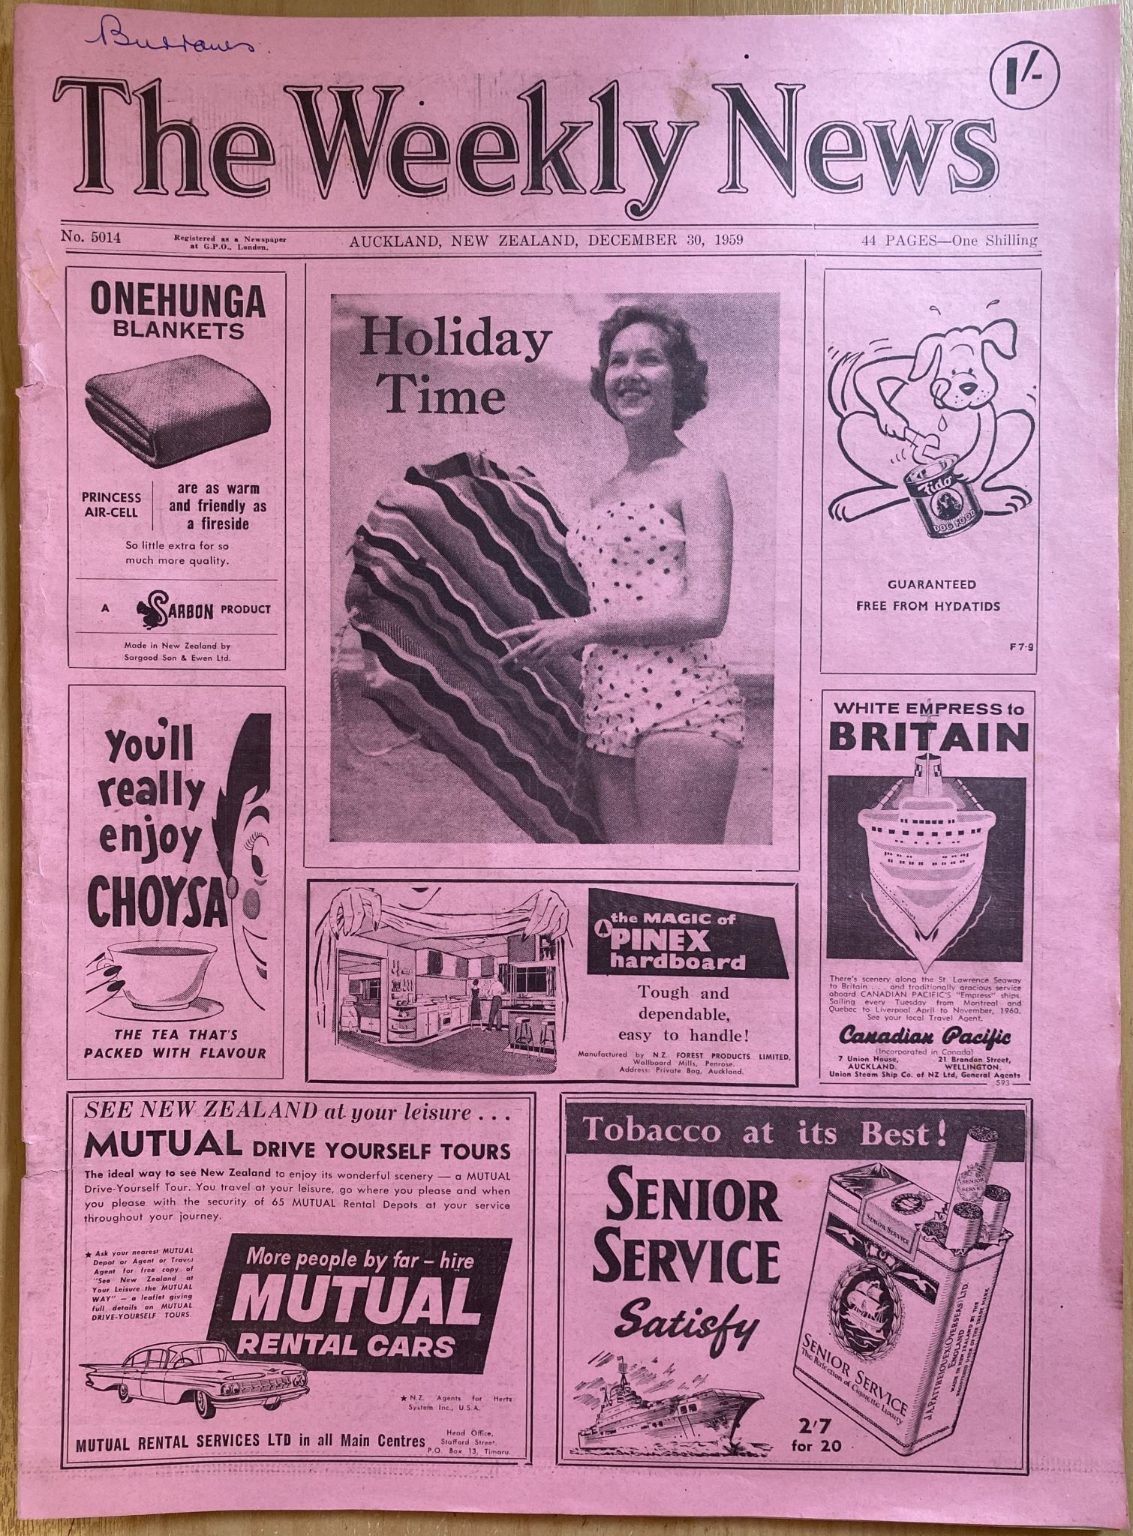 OLD NEWSPAPER: The Weekly News - No. 5014, 30 December 1959